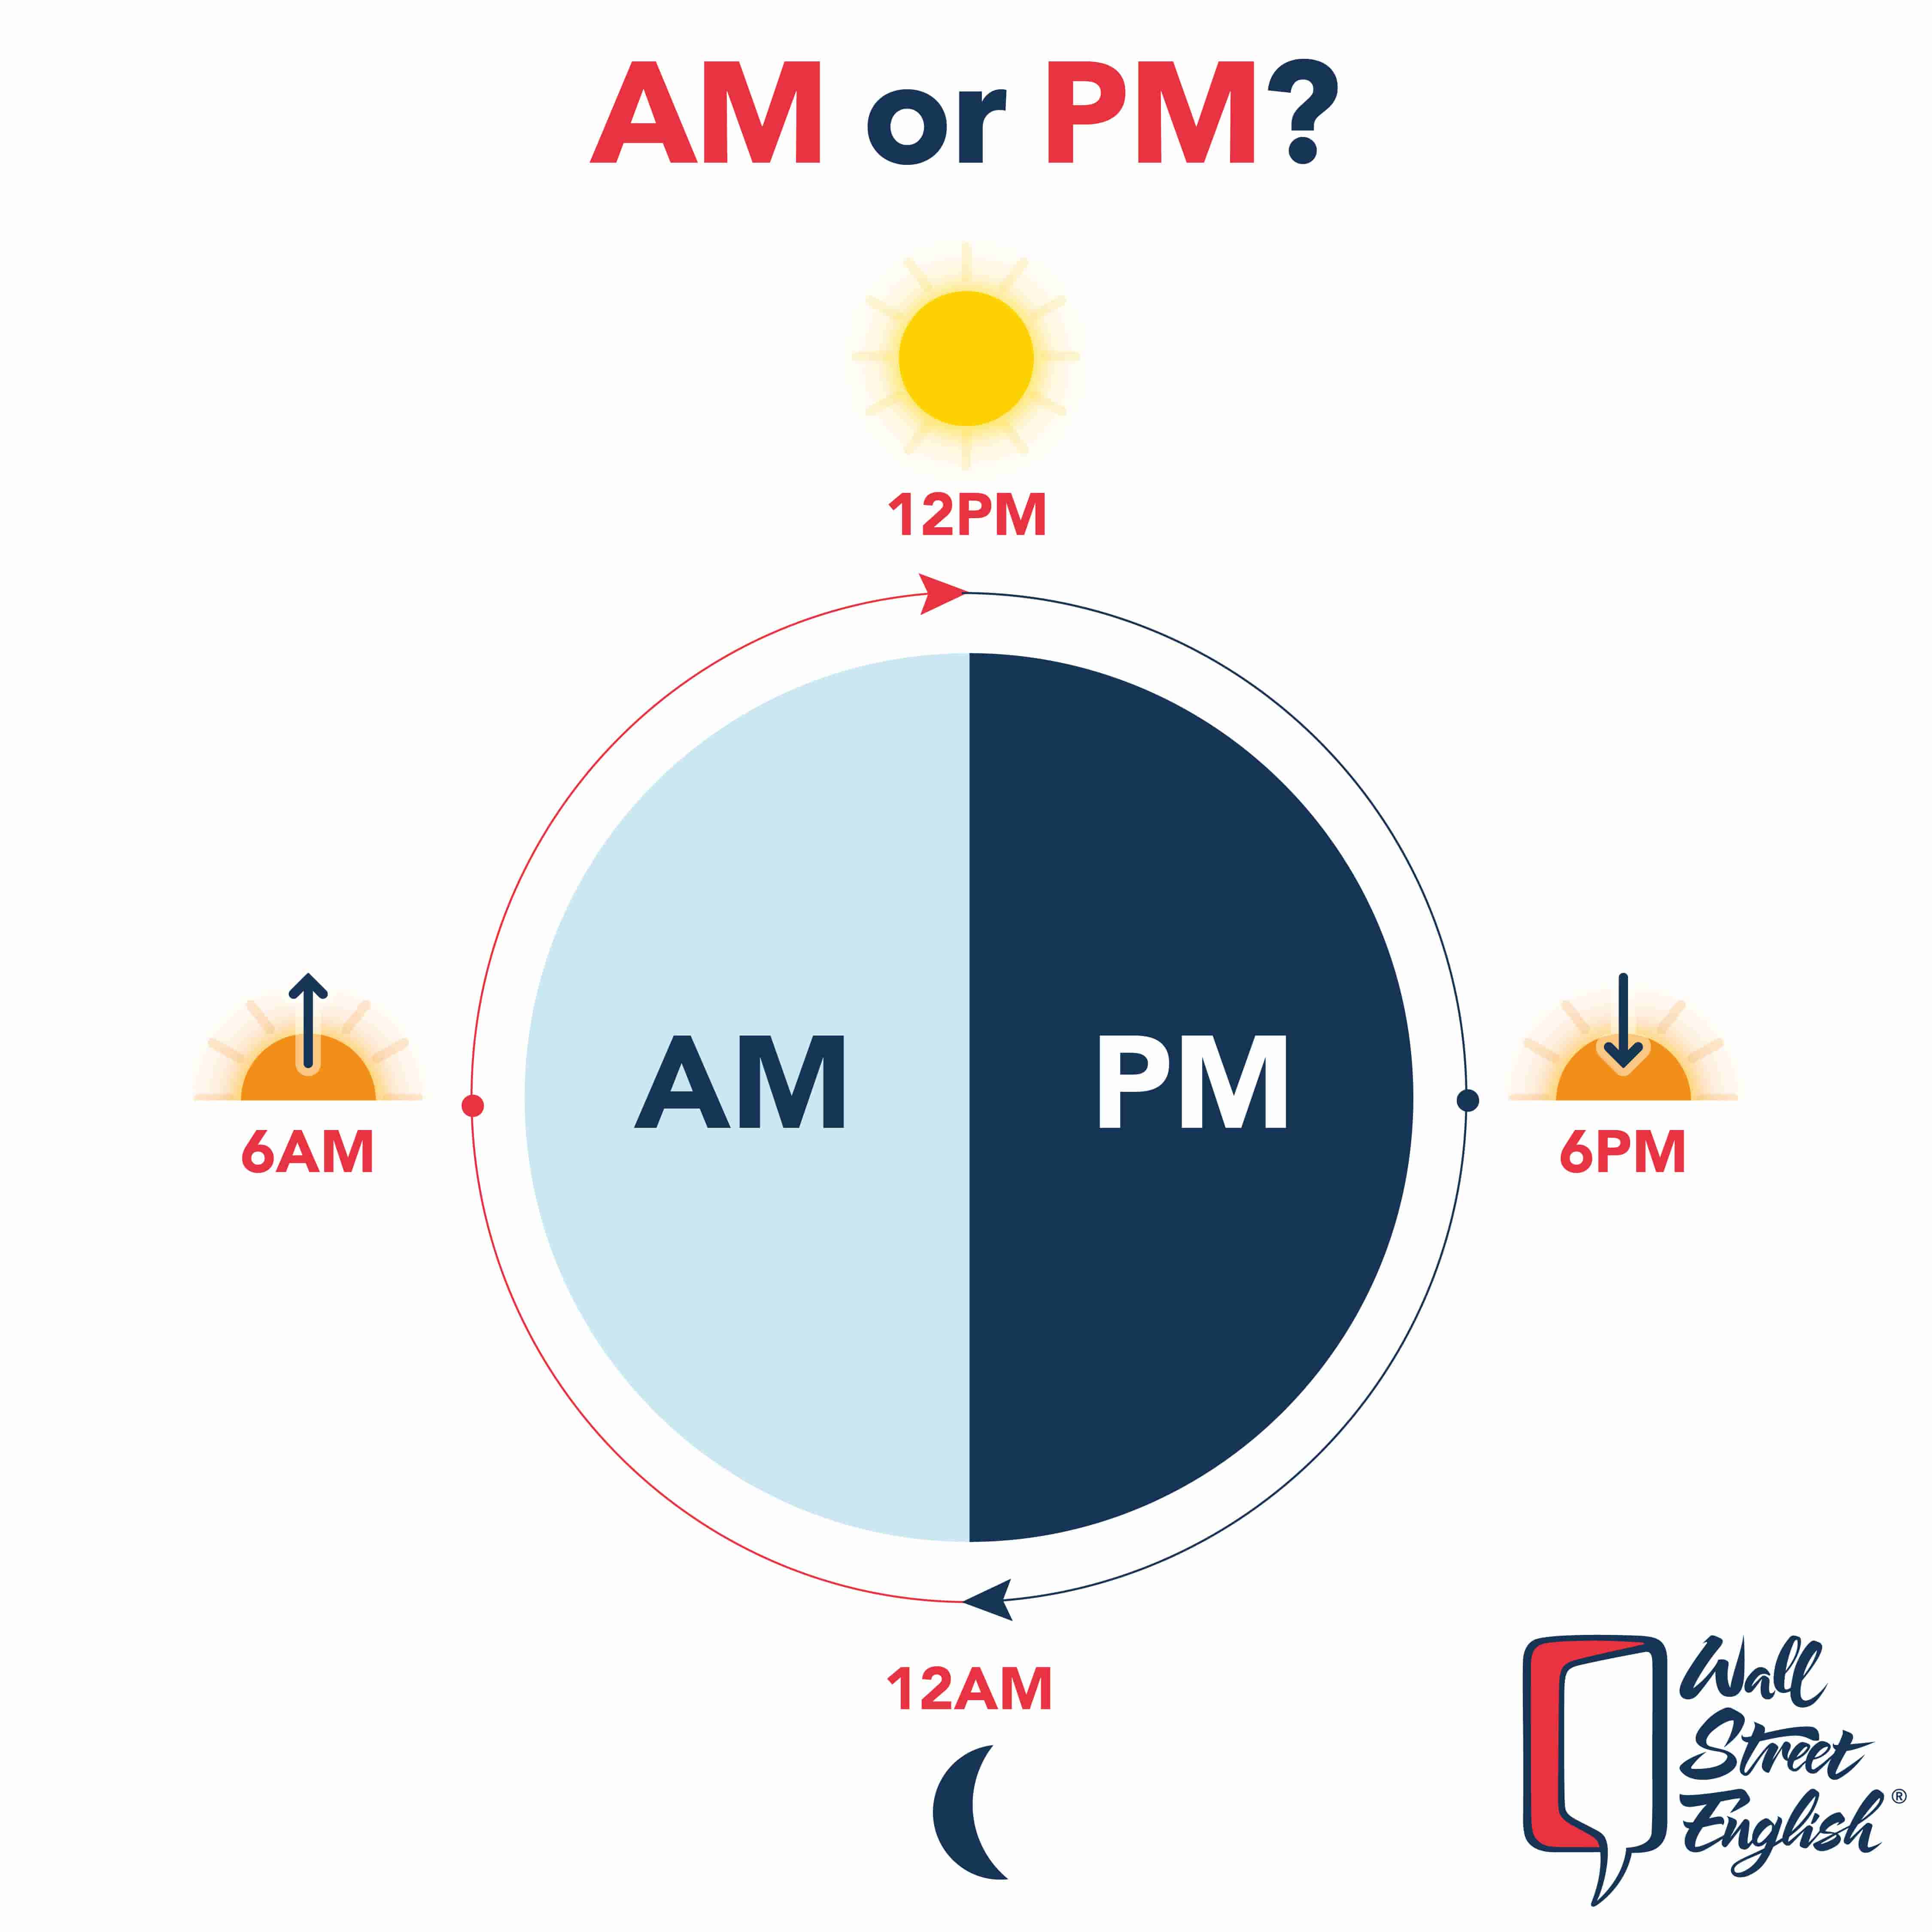 AM or PM